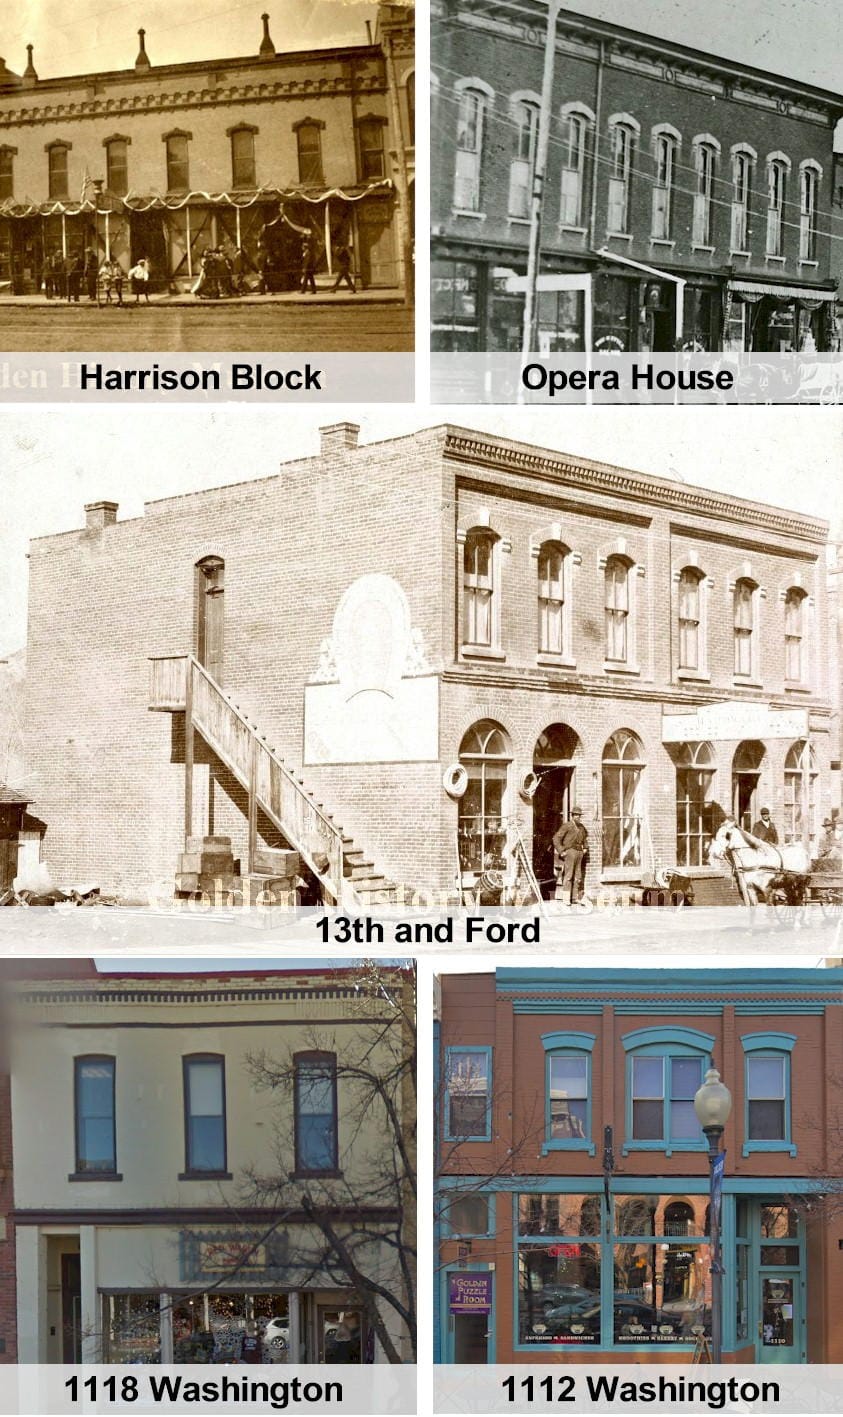 1 historic photos of buildings in Golden and two modern photos